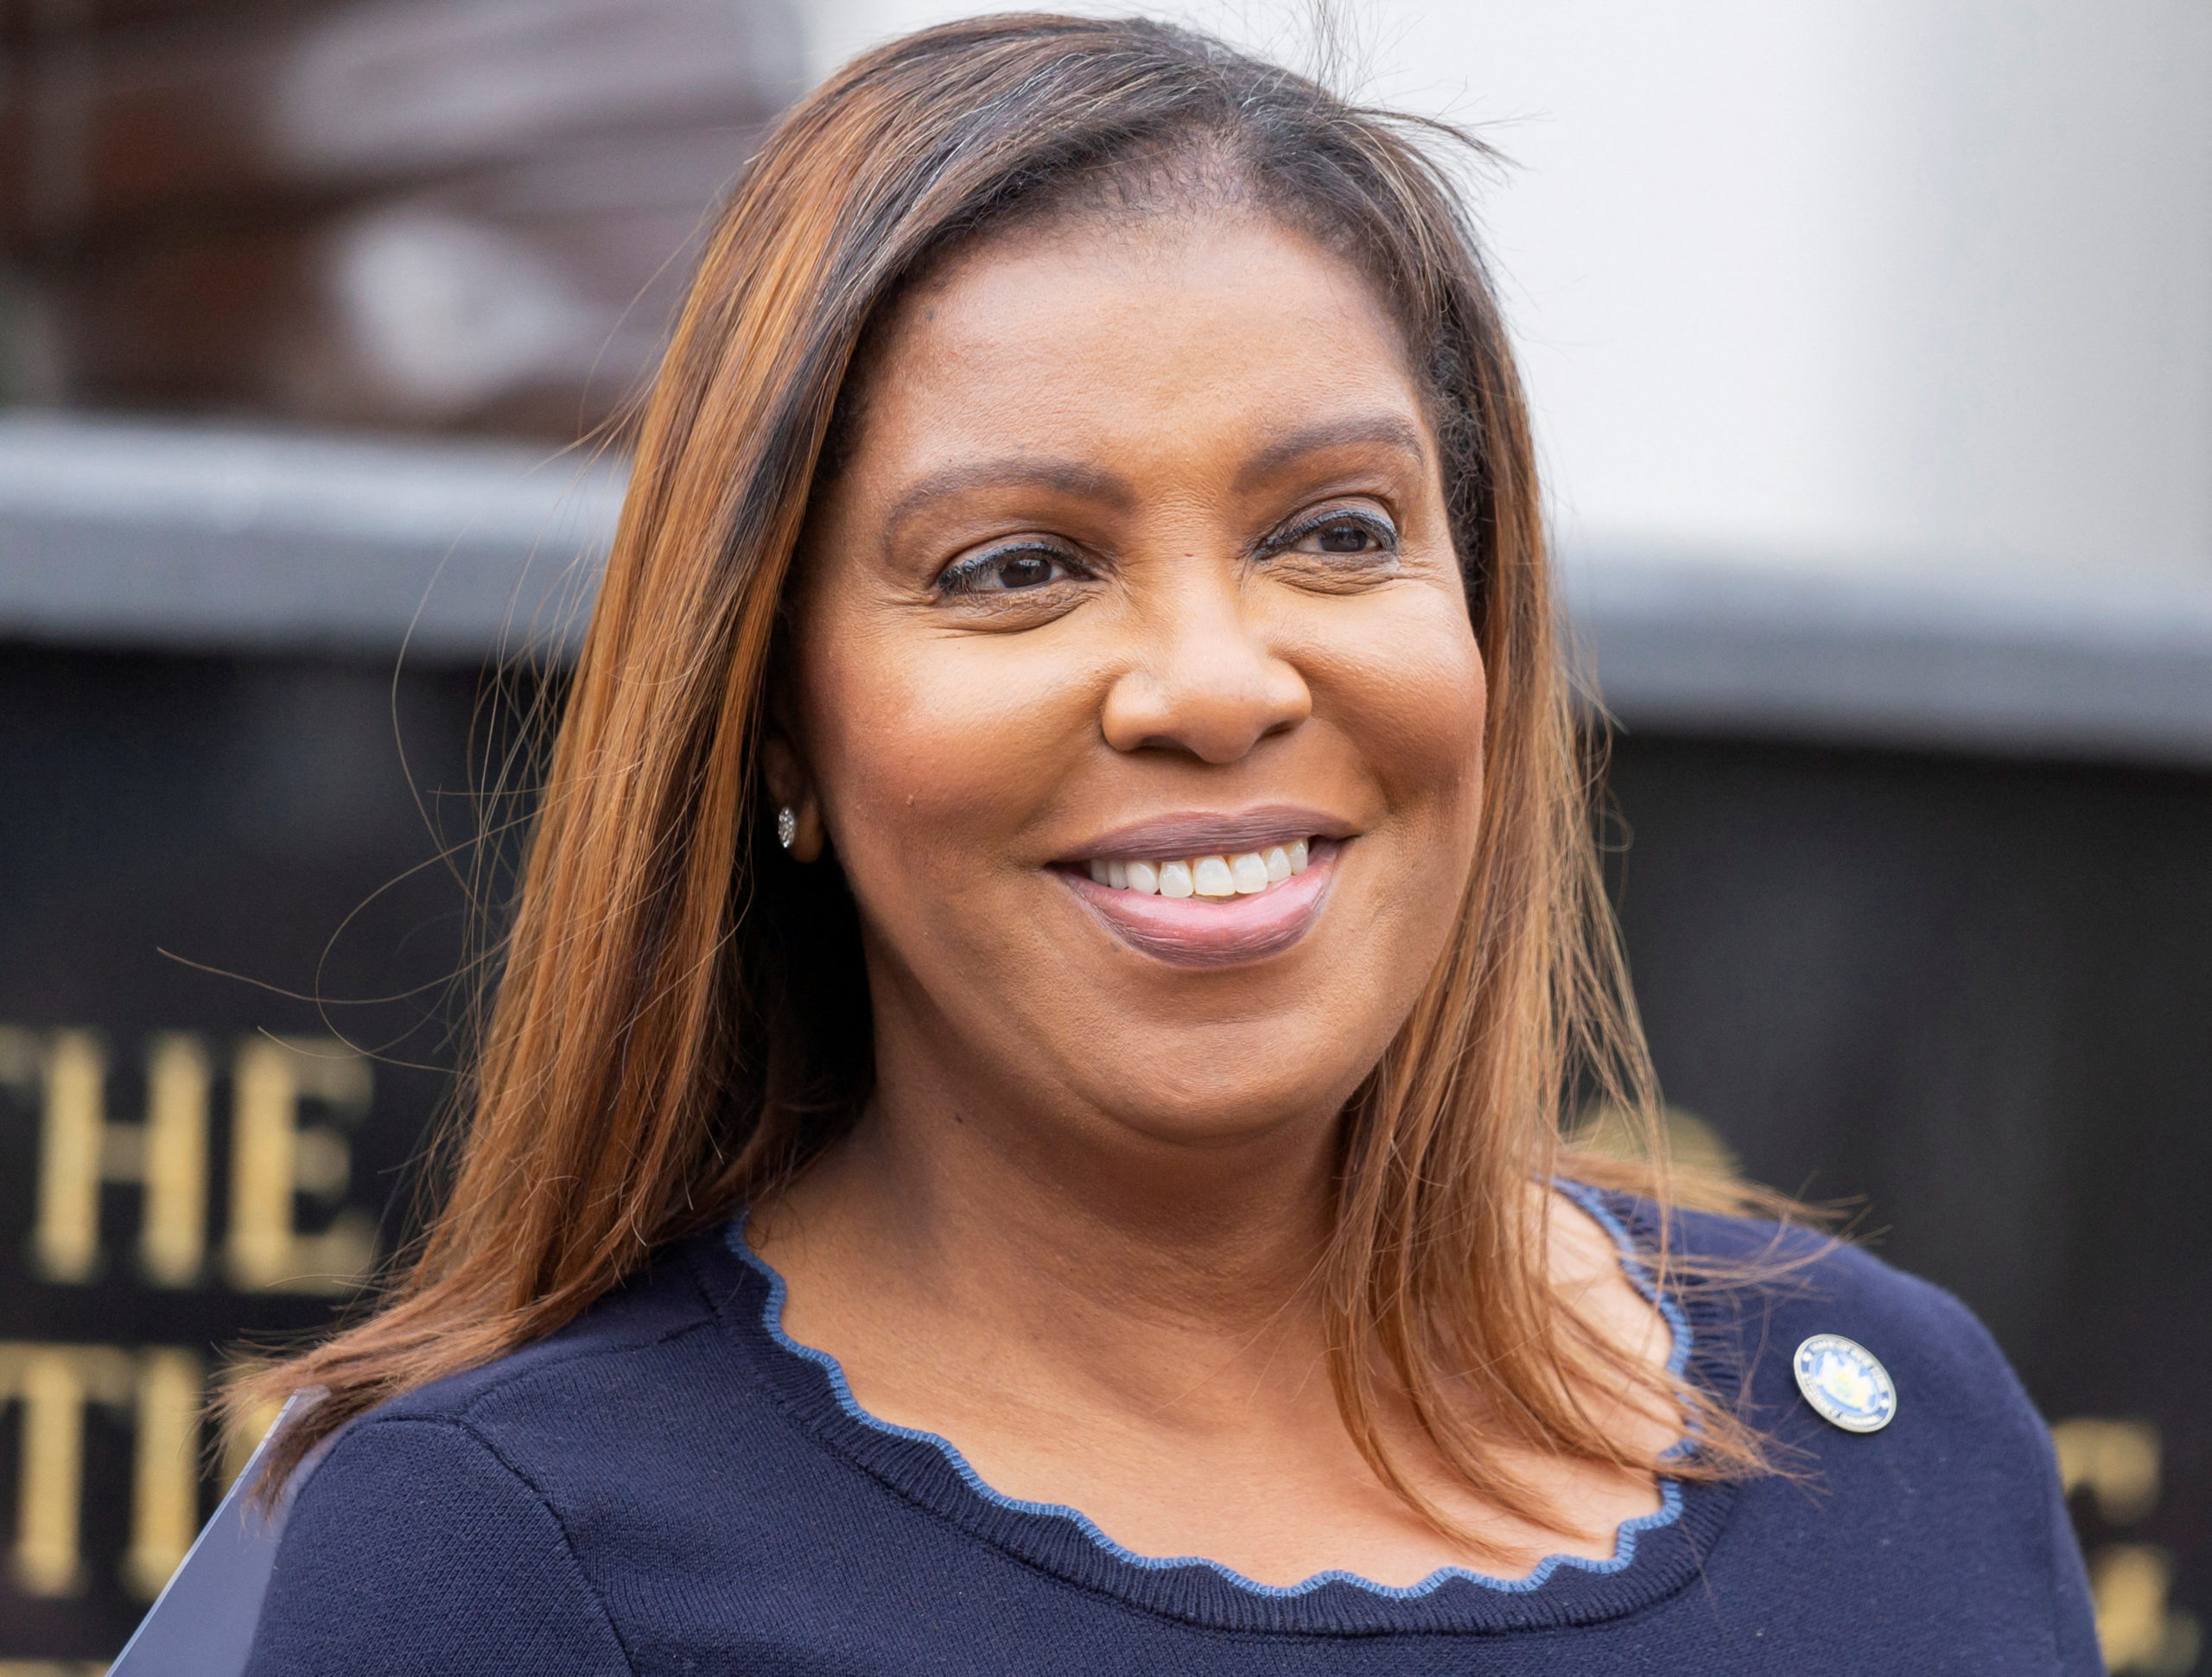 FILE PHOTO: New York State Attorney General Letitia James smiles after receiving endorsements from Westchester County leaders for her bid for New York governor in White Plains, New York, U.S., December 2, 2021. REUTERS/Joy Malone/File Photo